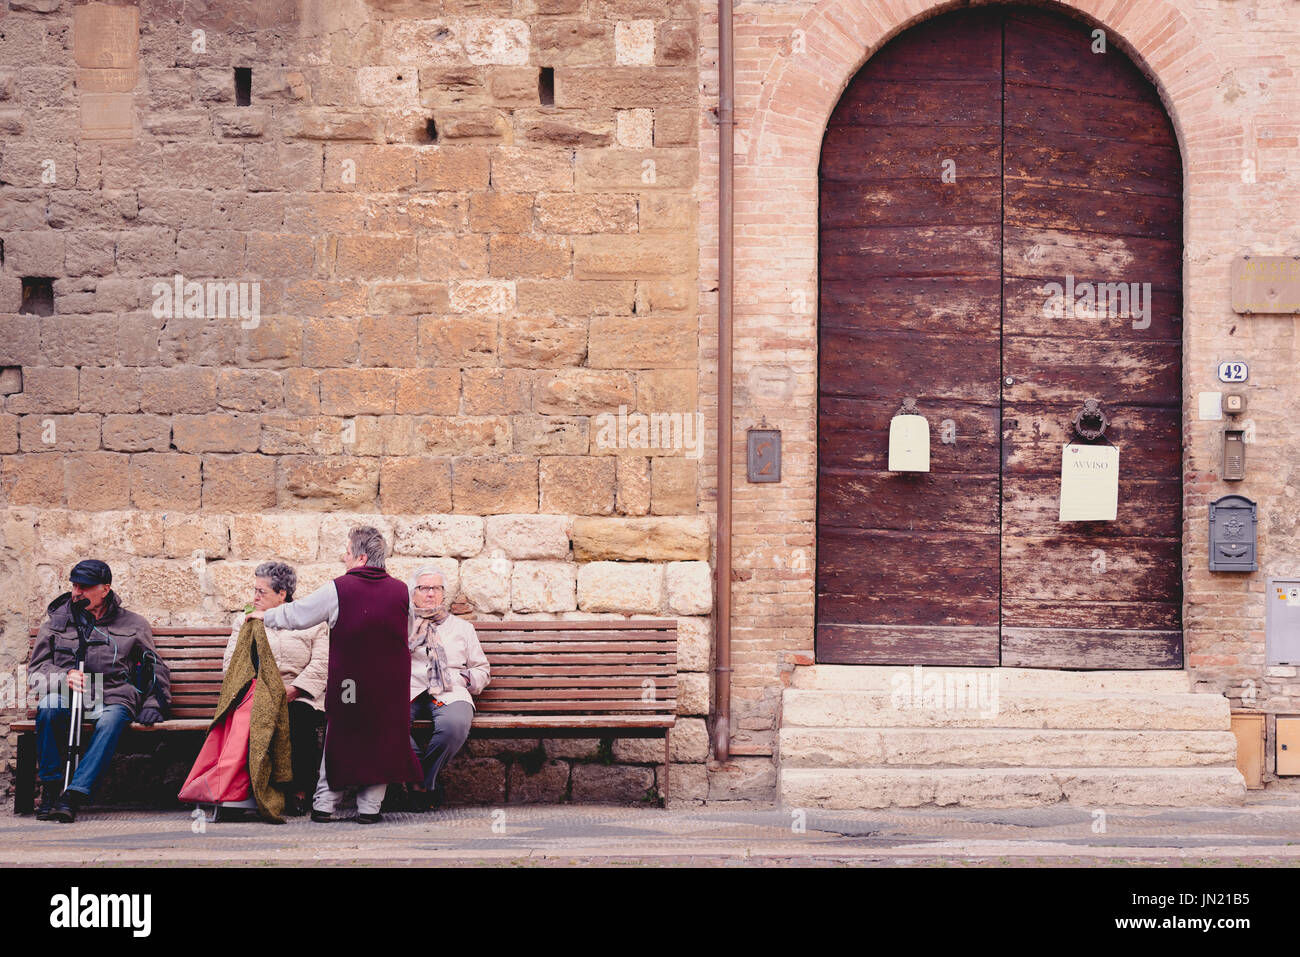 COLLE VAL D'ELSA, ITALY - APRIL 25, 2017 - A group of senior people relax on a public bench in the historic district of Colle Val d'Elsa, a small town Stock Photo